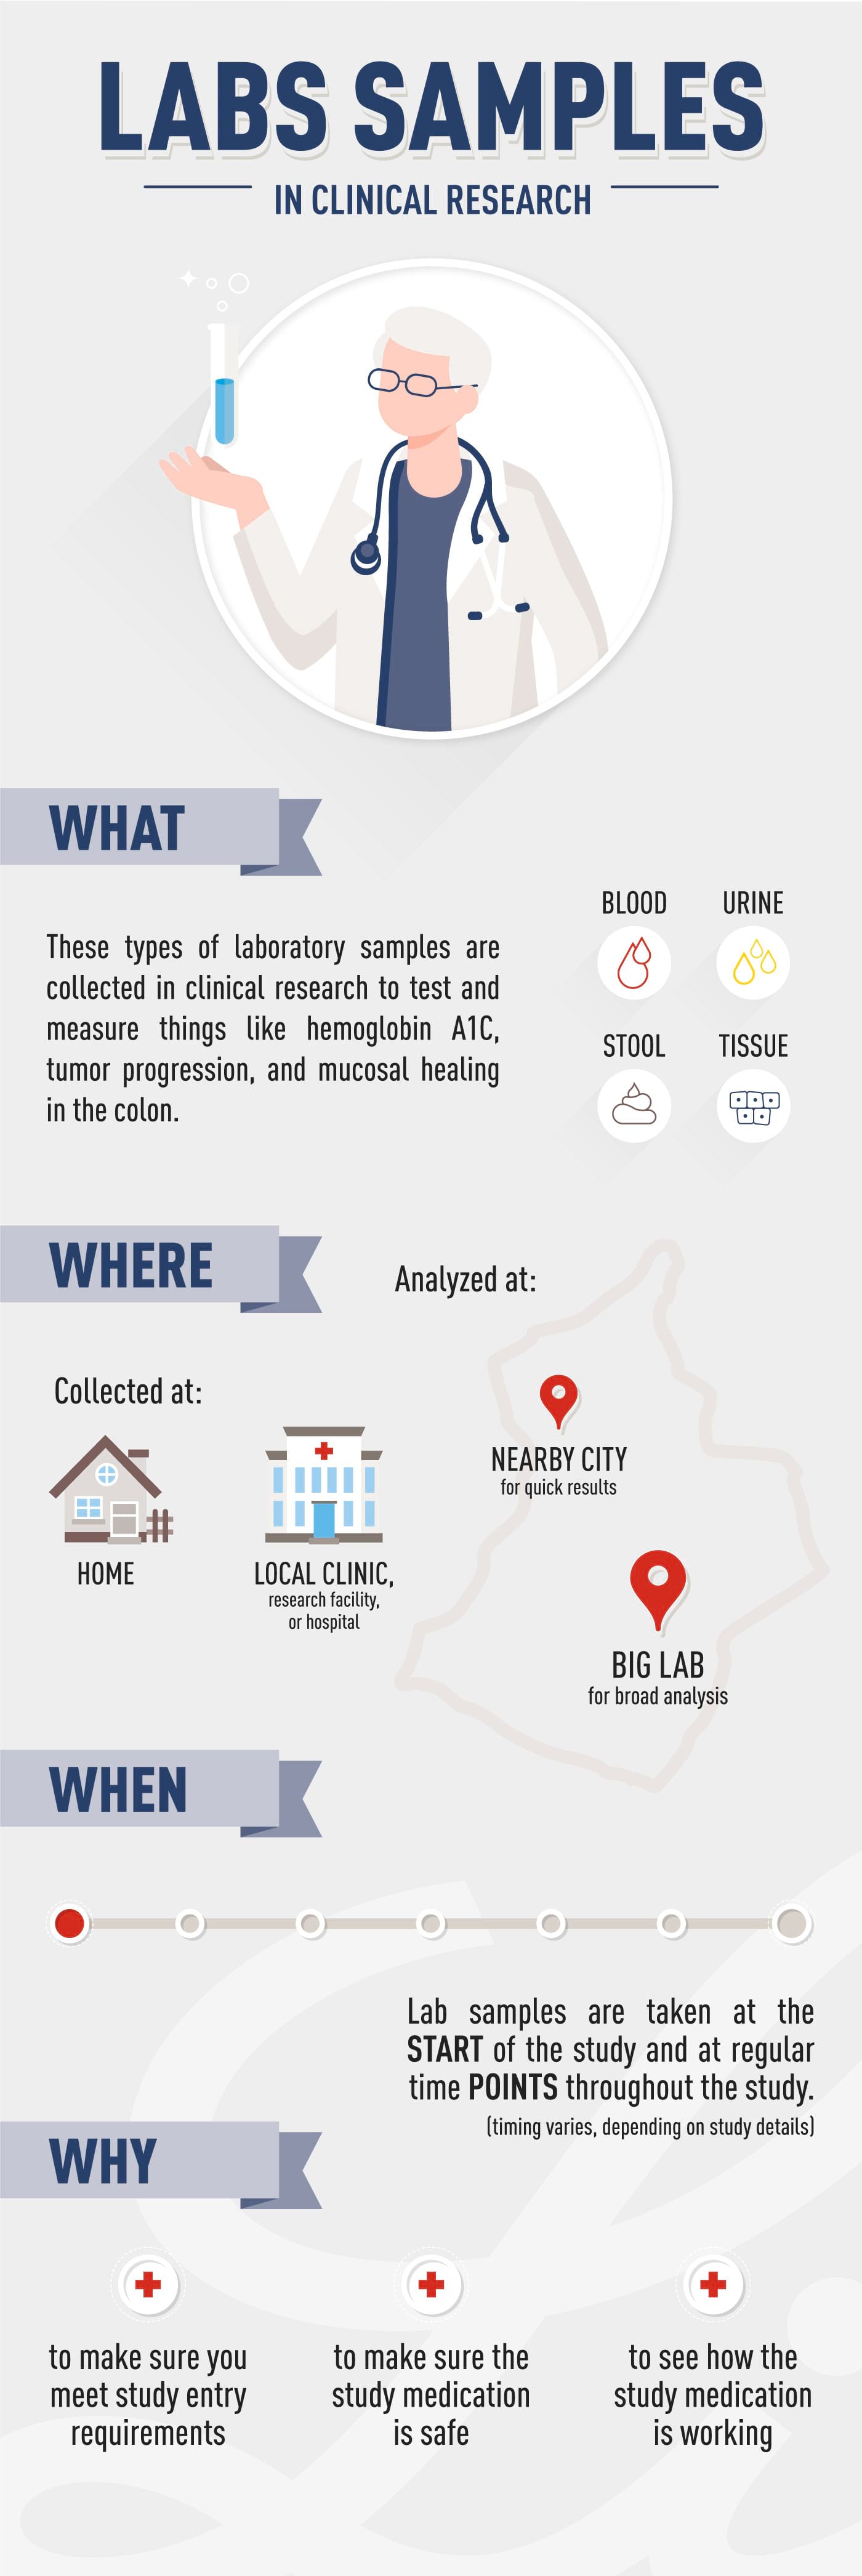 LabSamplesAndClinicalResearch101 Infographic 17Nov2022